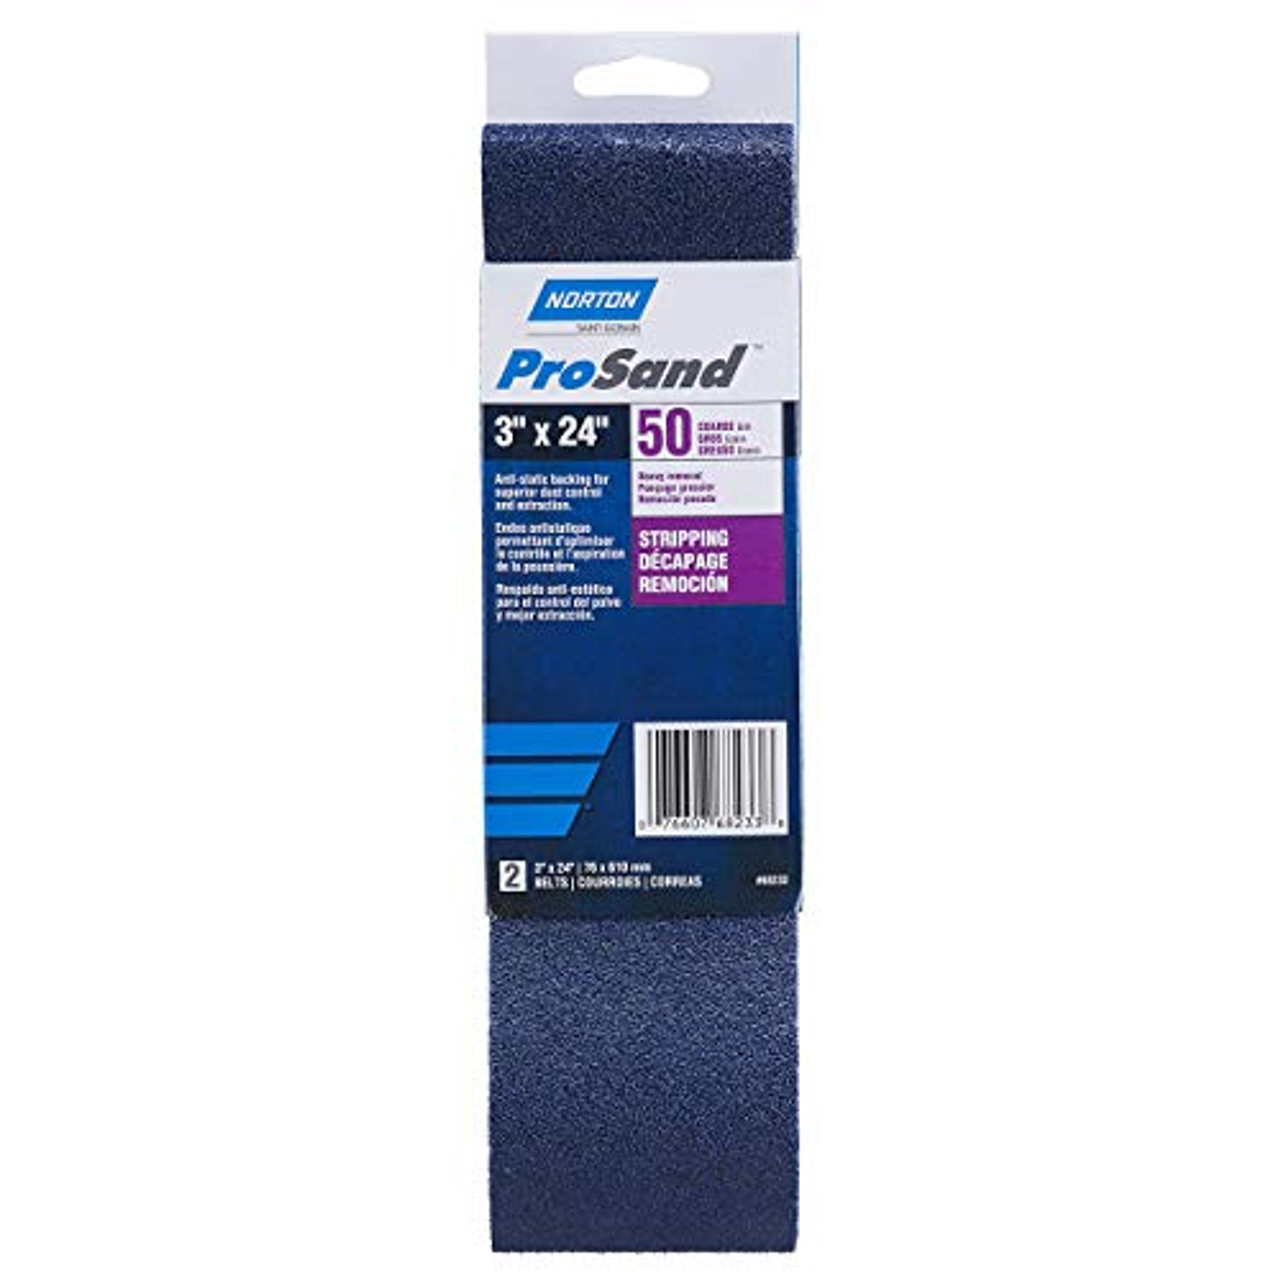 Norton 3 x 24 in. ProSand Cloth Portable Belt 50 Grit R831 ZA Pack of 2